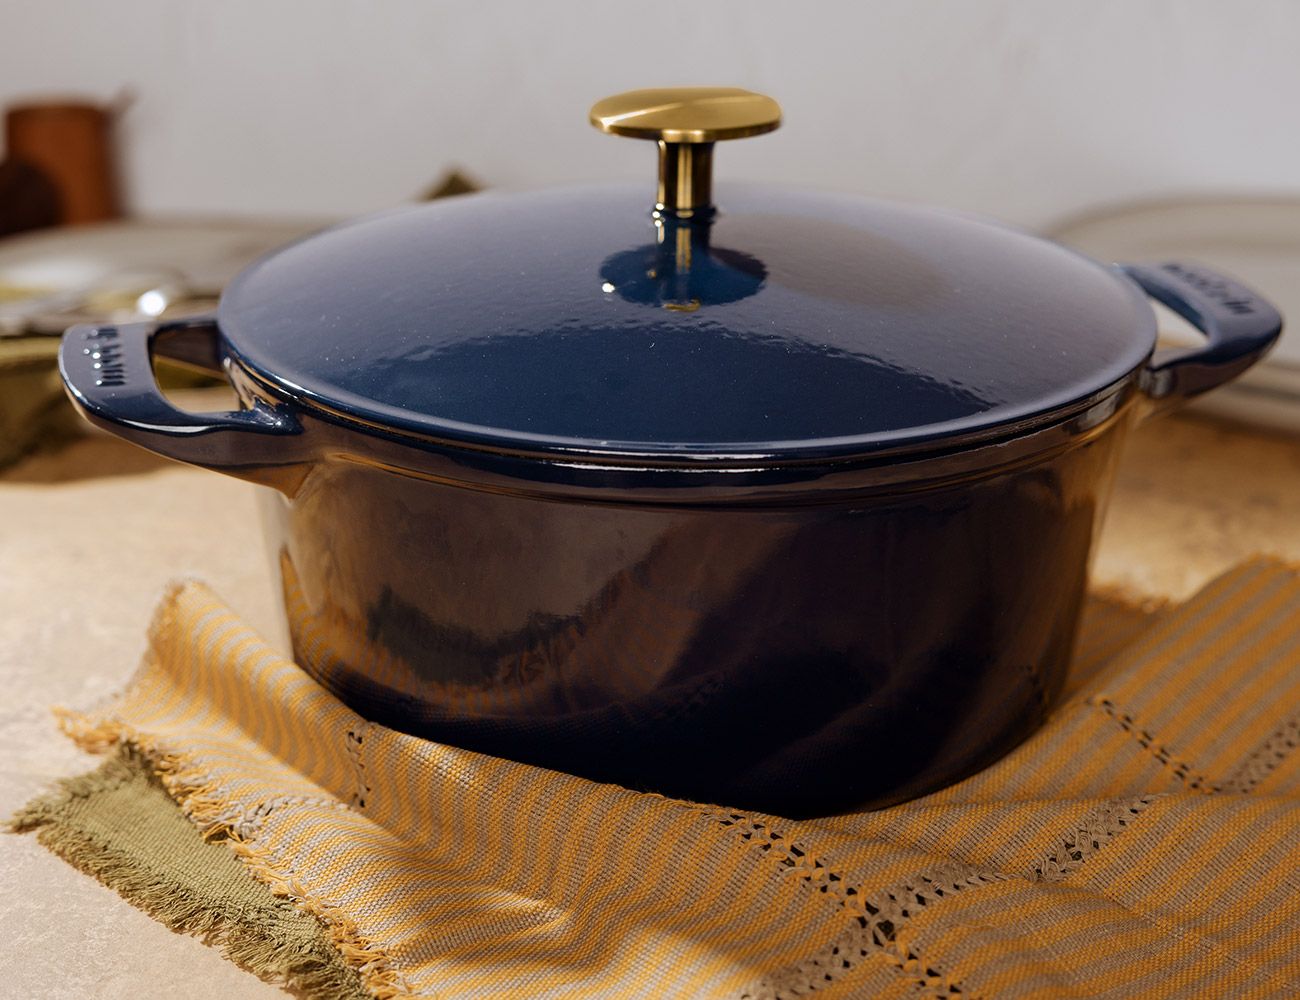 I Tried Made In's Brand New Dutch Oven—Here Are My Honest